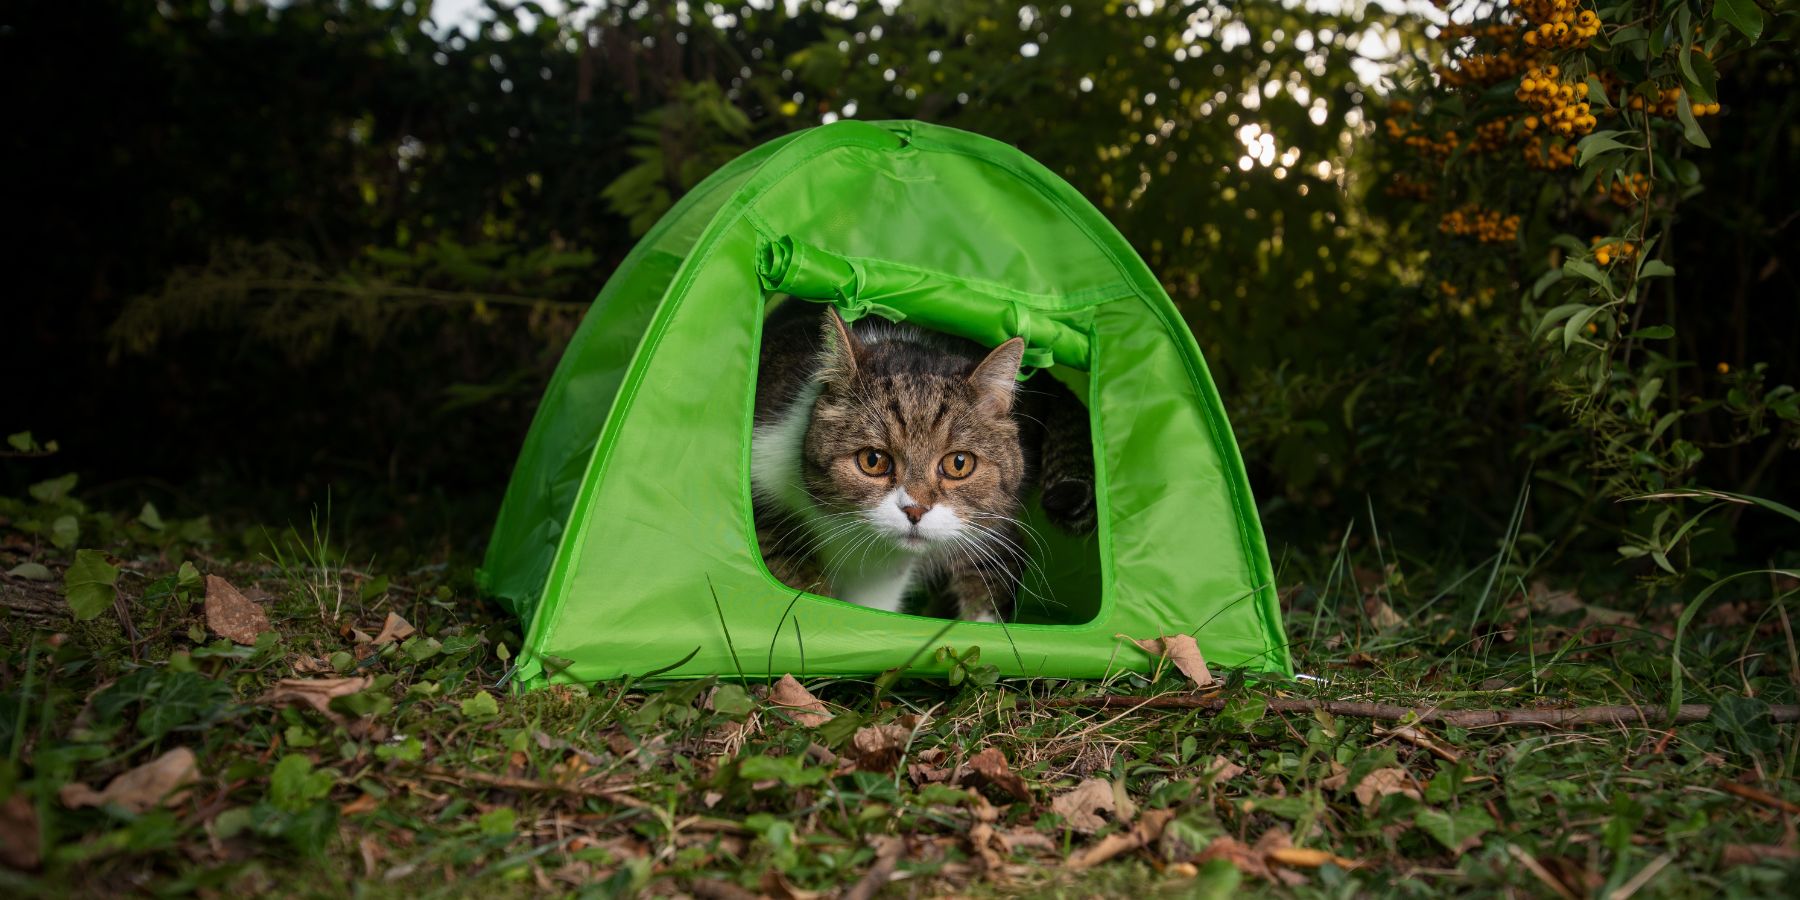 What Are Essential Safety Tips for Camping with Felines?